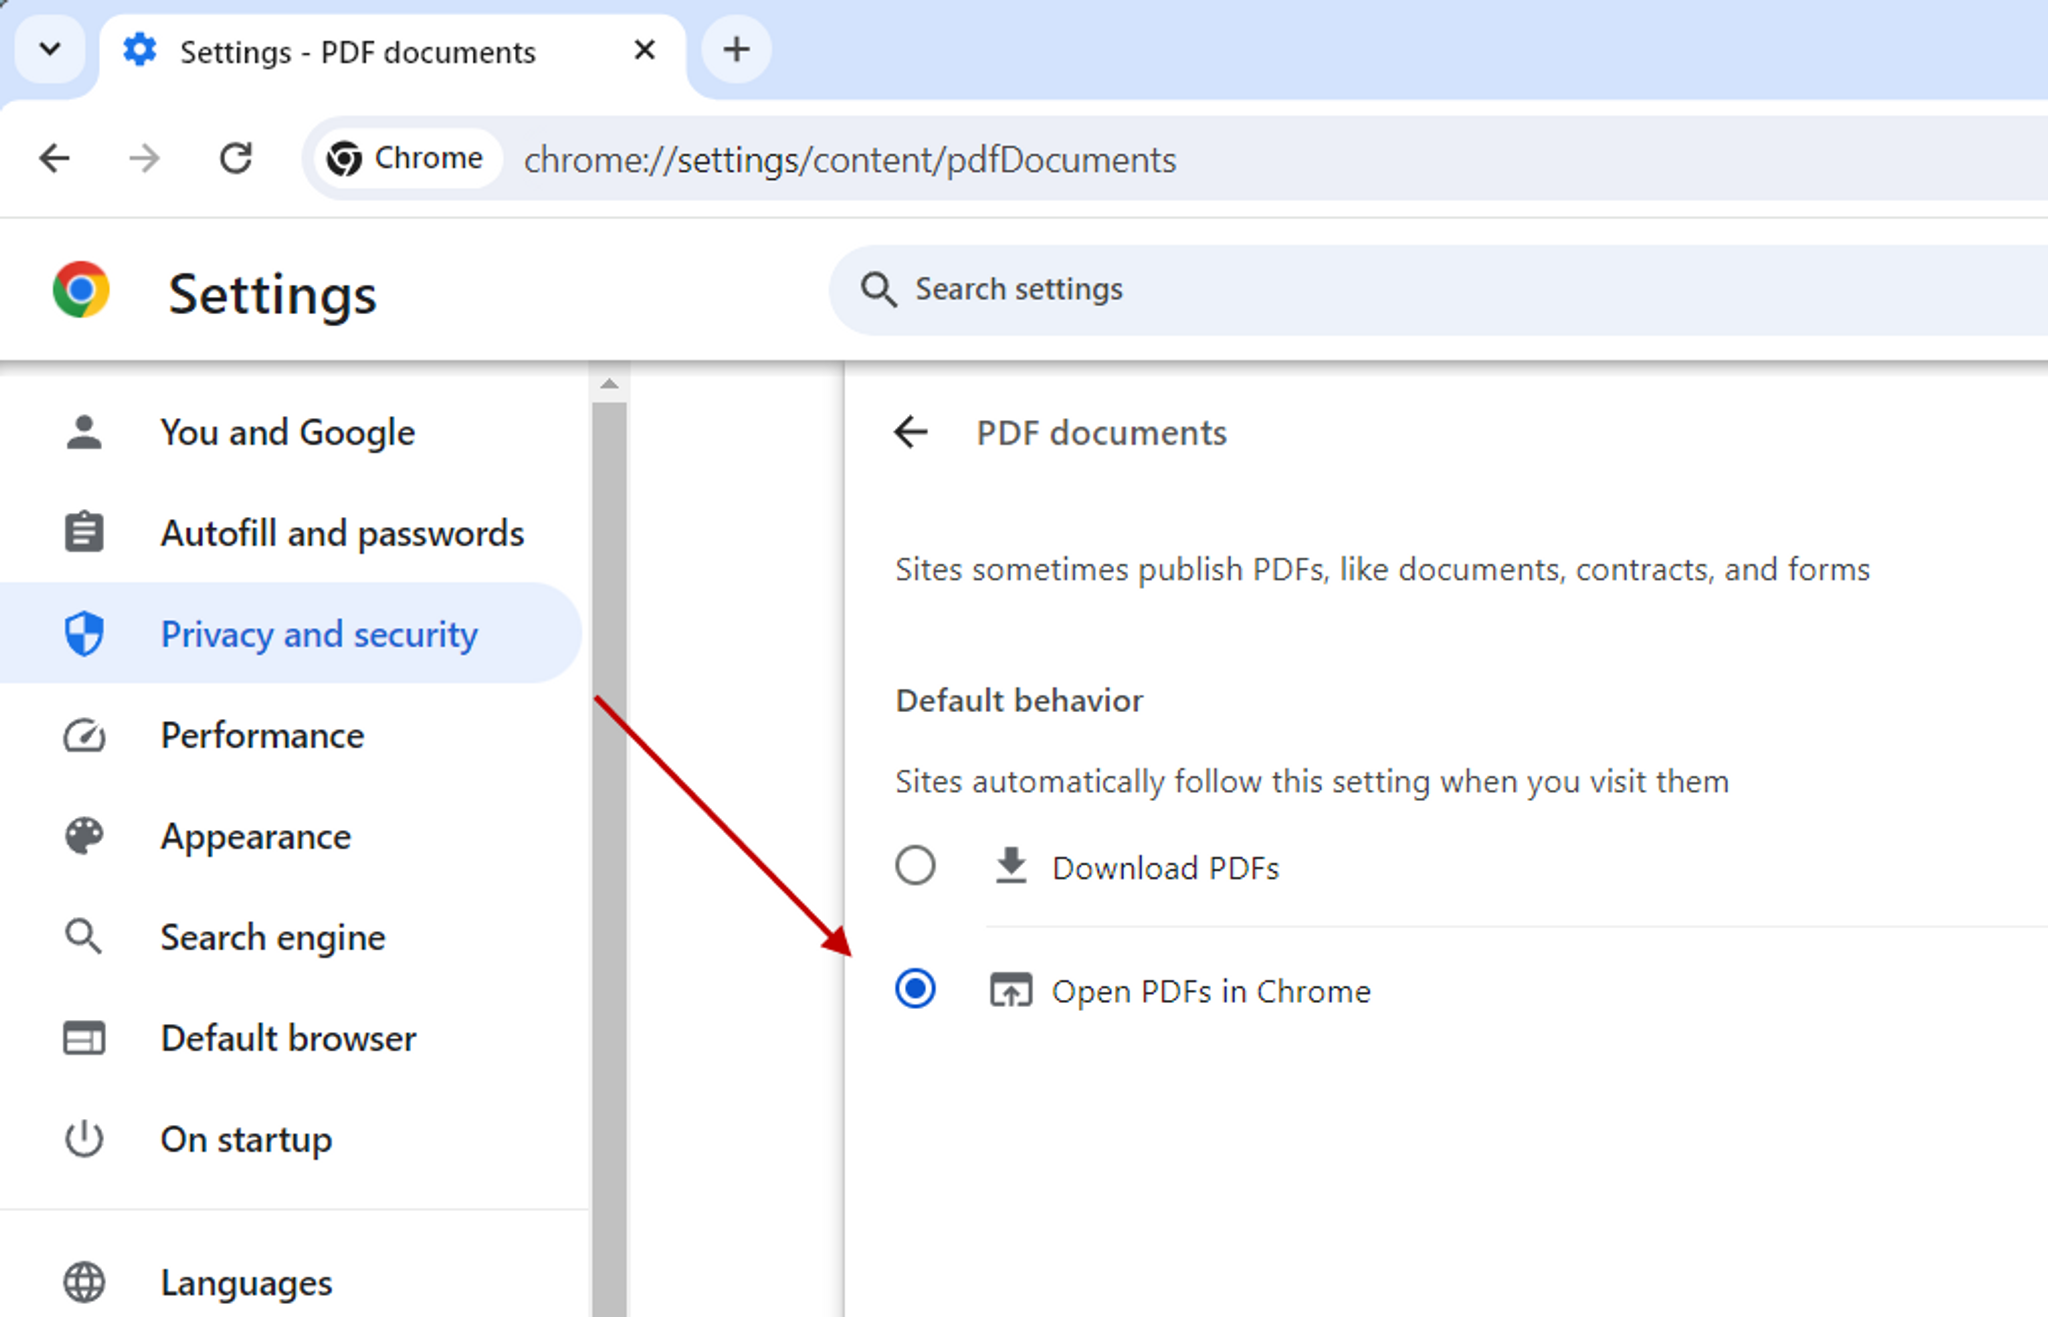 Chrome settings for opening PDFs in Chrome